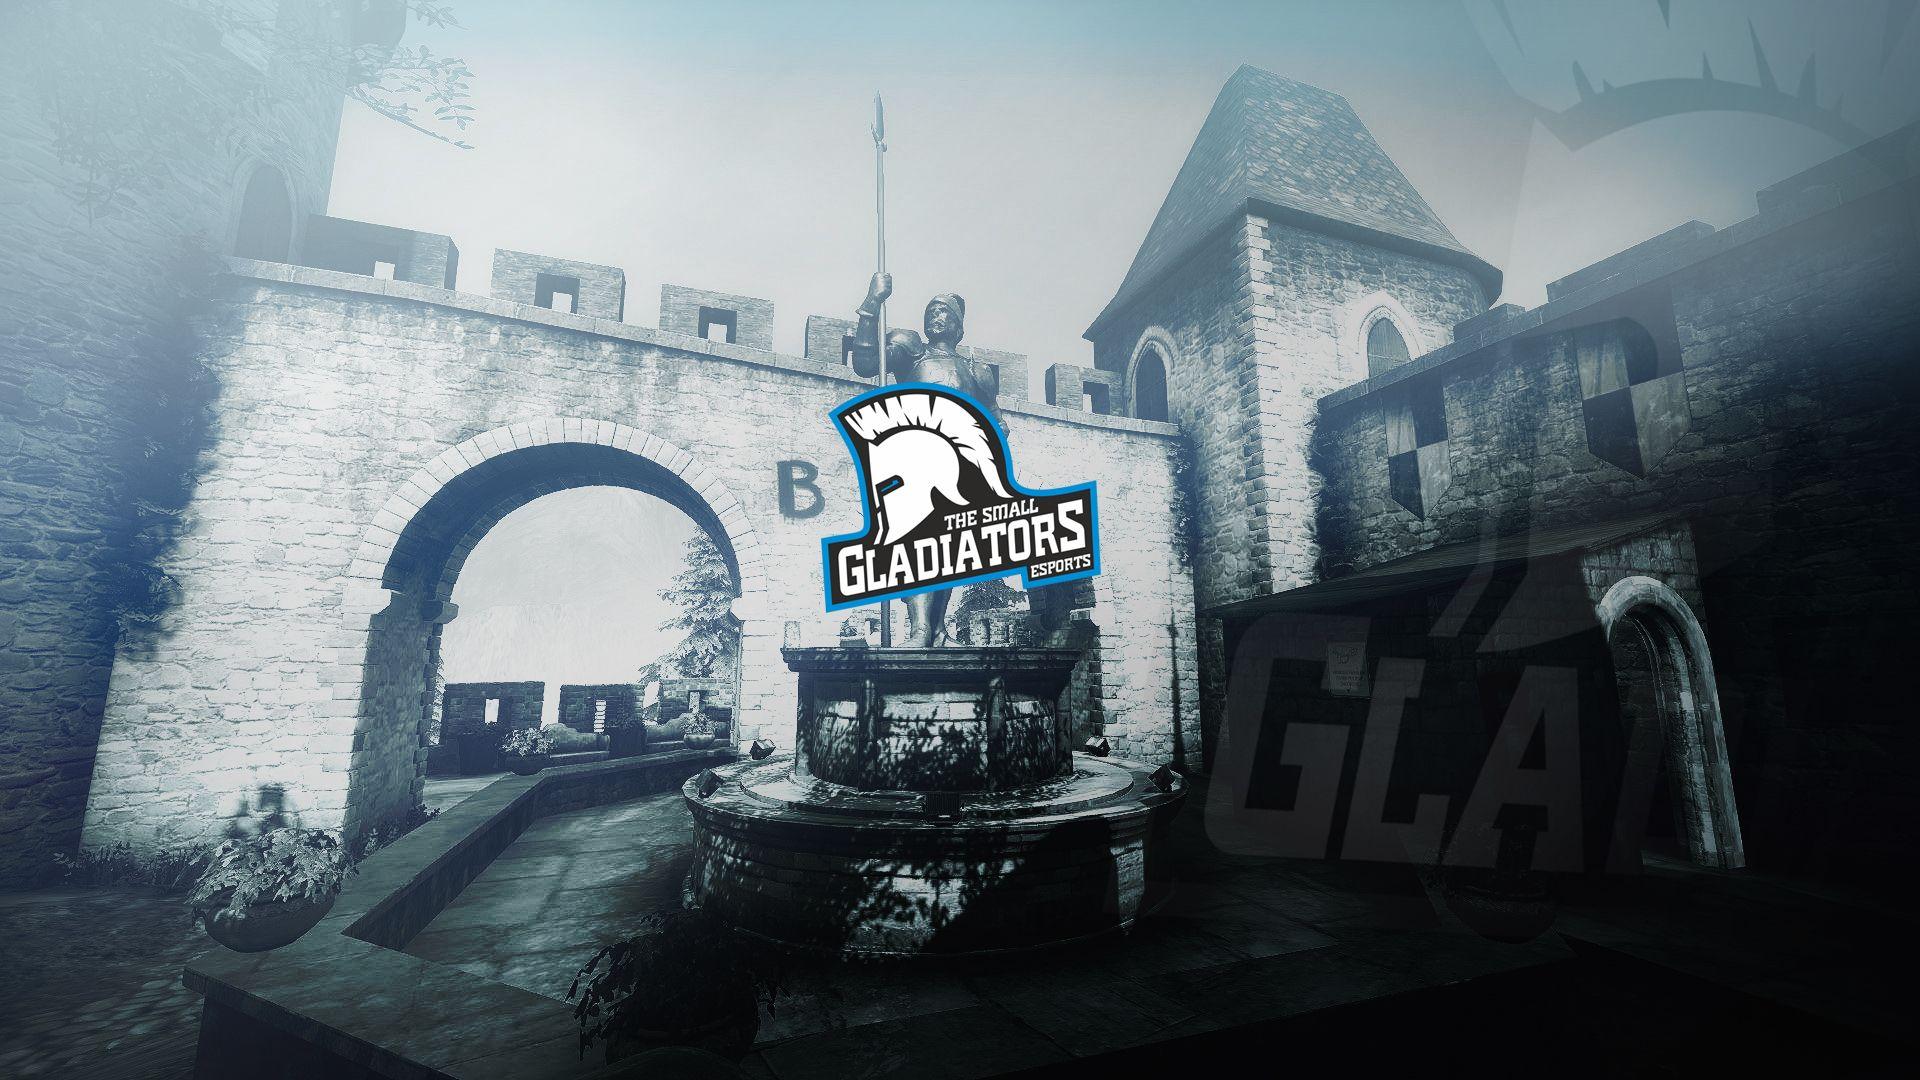 The Small Gladiators Wallpaper. CS:GO Wallpaper and Background